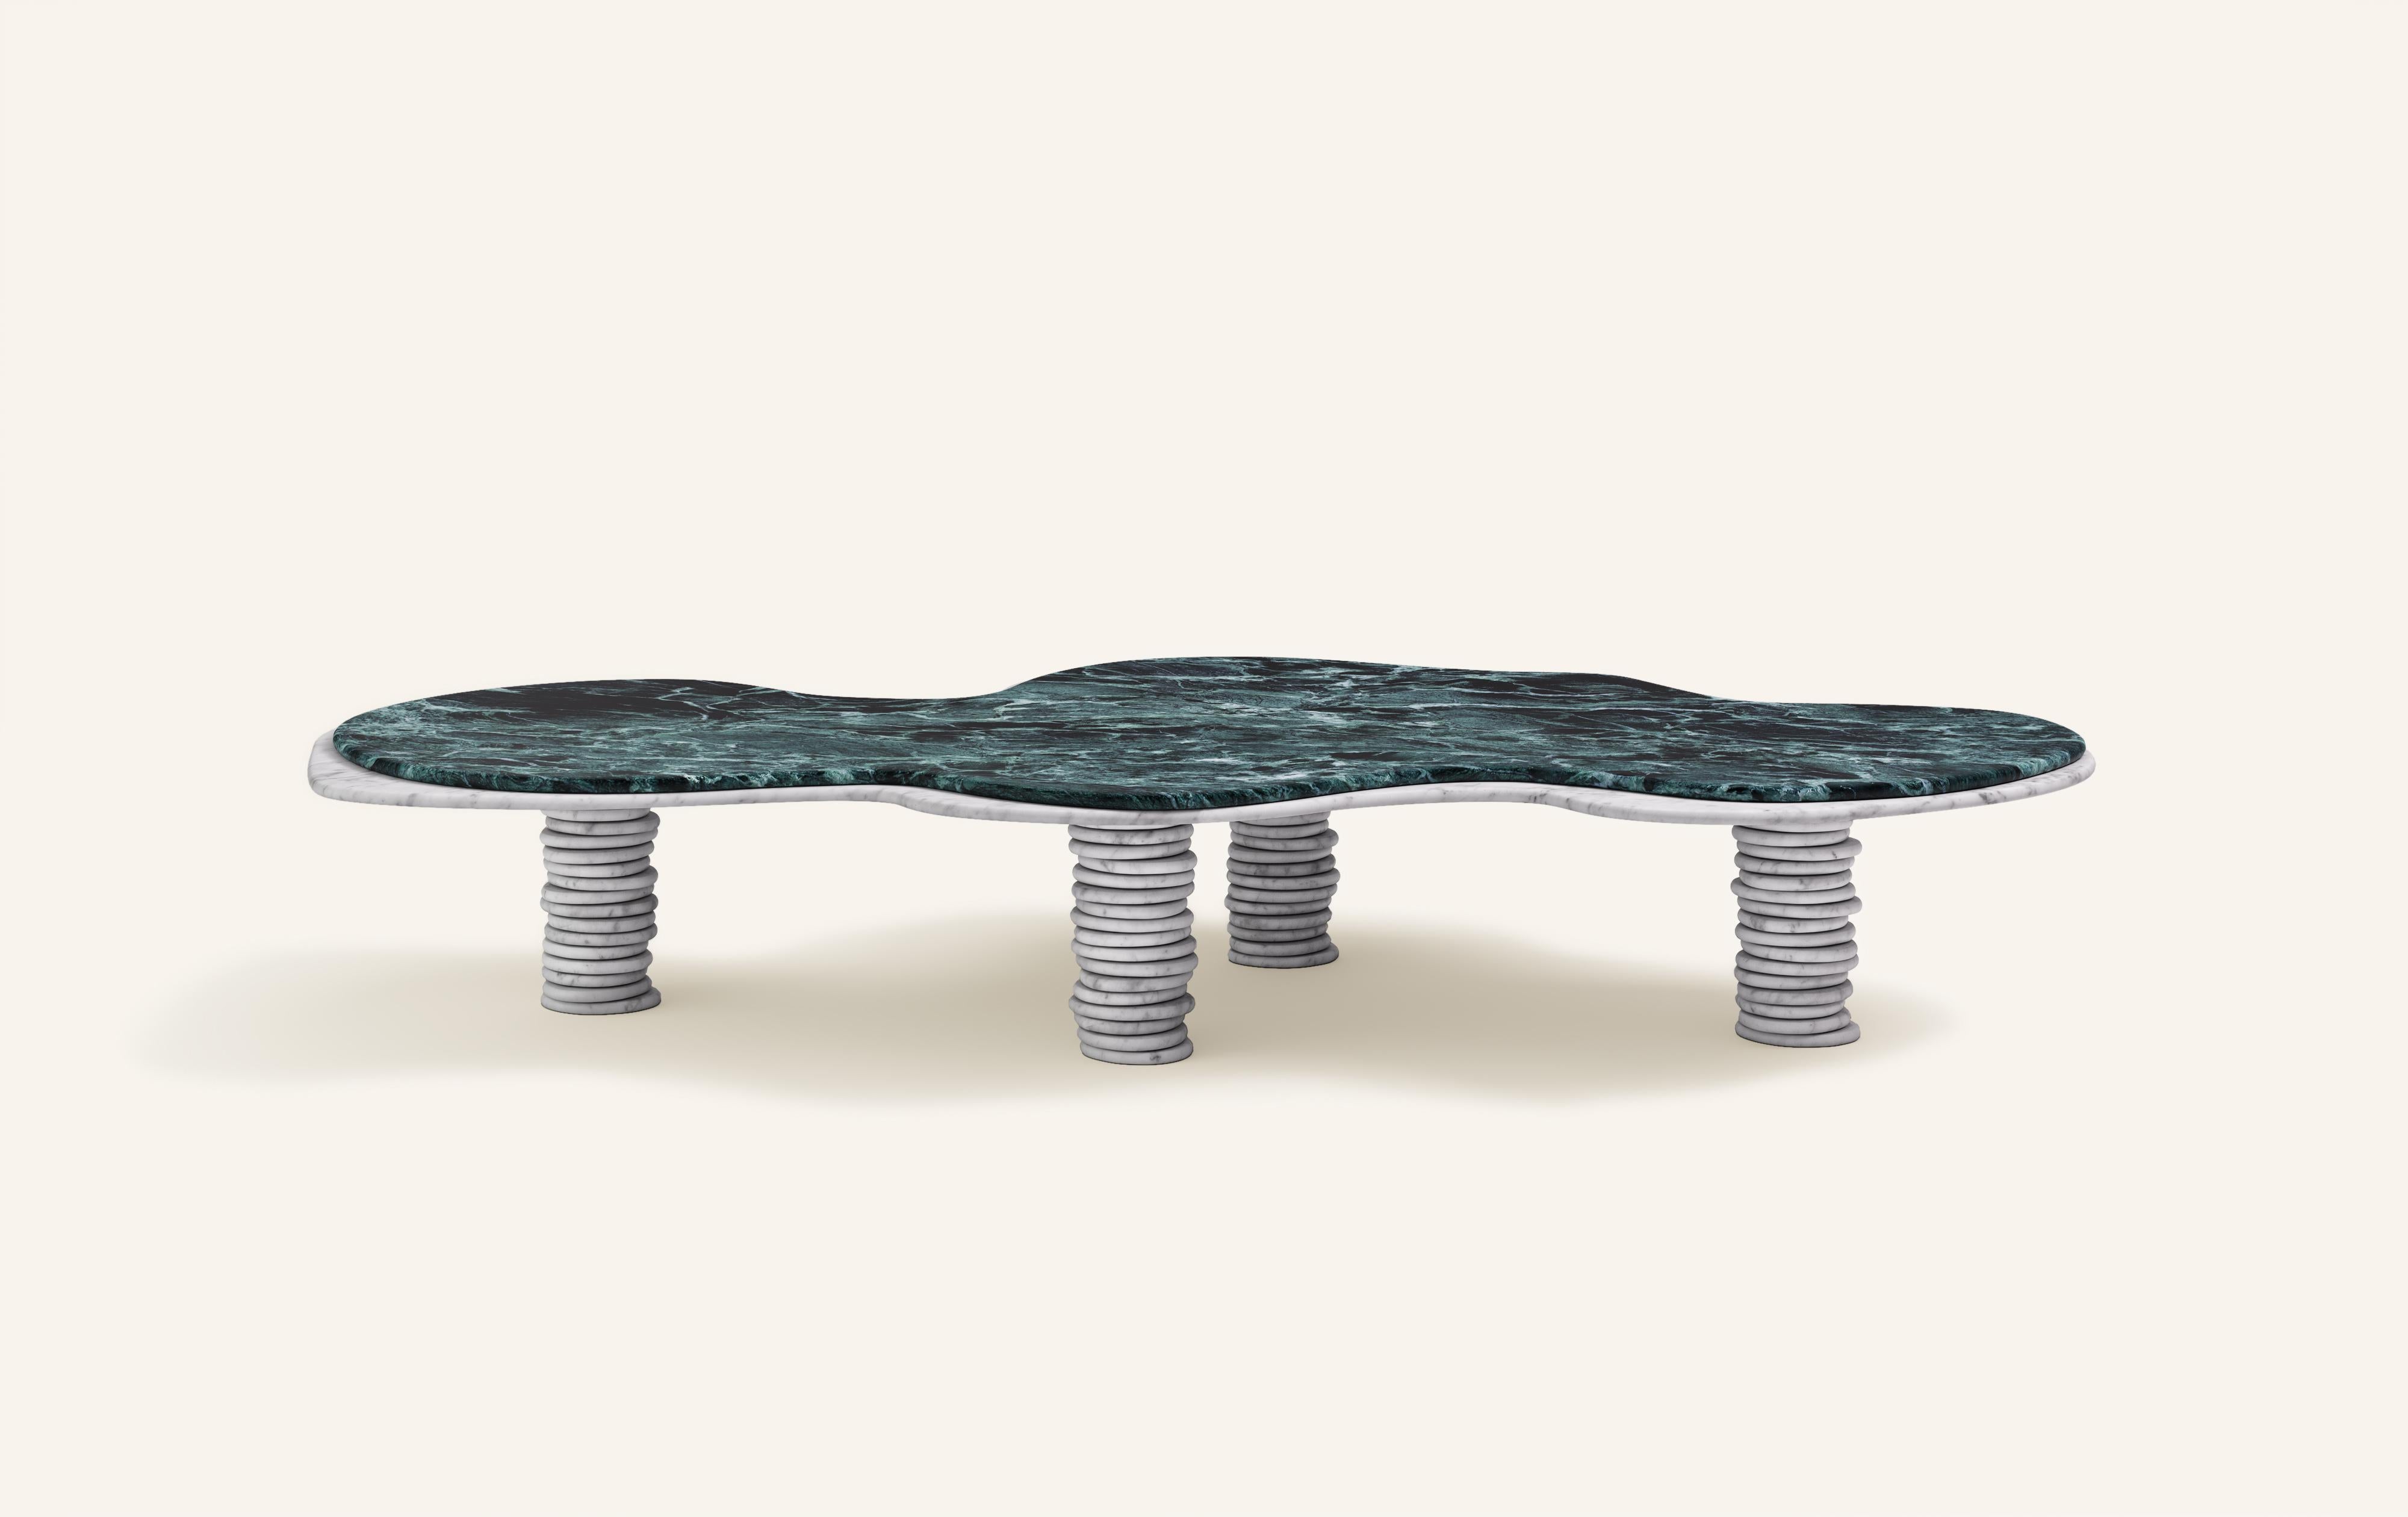 'ONDA', ITALIAN FOR 'WAVE', HAS INSPIRED A FREEFORM ORGANIC BODY, HEROING A COMPLEX AND TEXTURED COLLECTION. COMPRISING SIDE TABLES FOR LAYERING, COFFEE TABLES AND DINING TABLES.

DIMENSIONS:
84”L x 46”W x 14-3/16”H: 
- 1.5